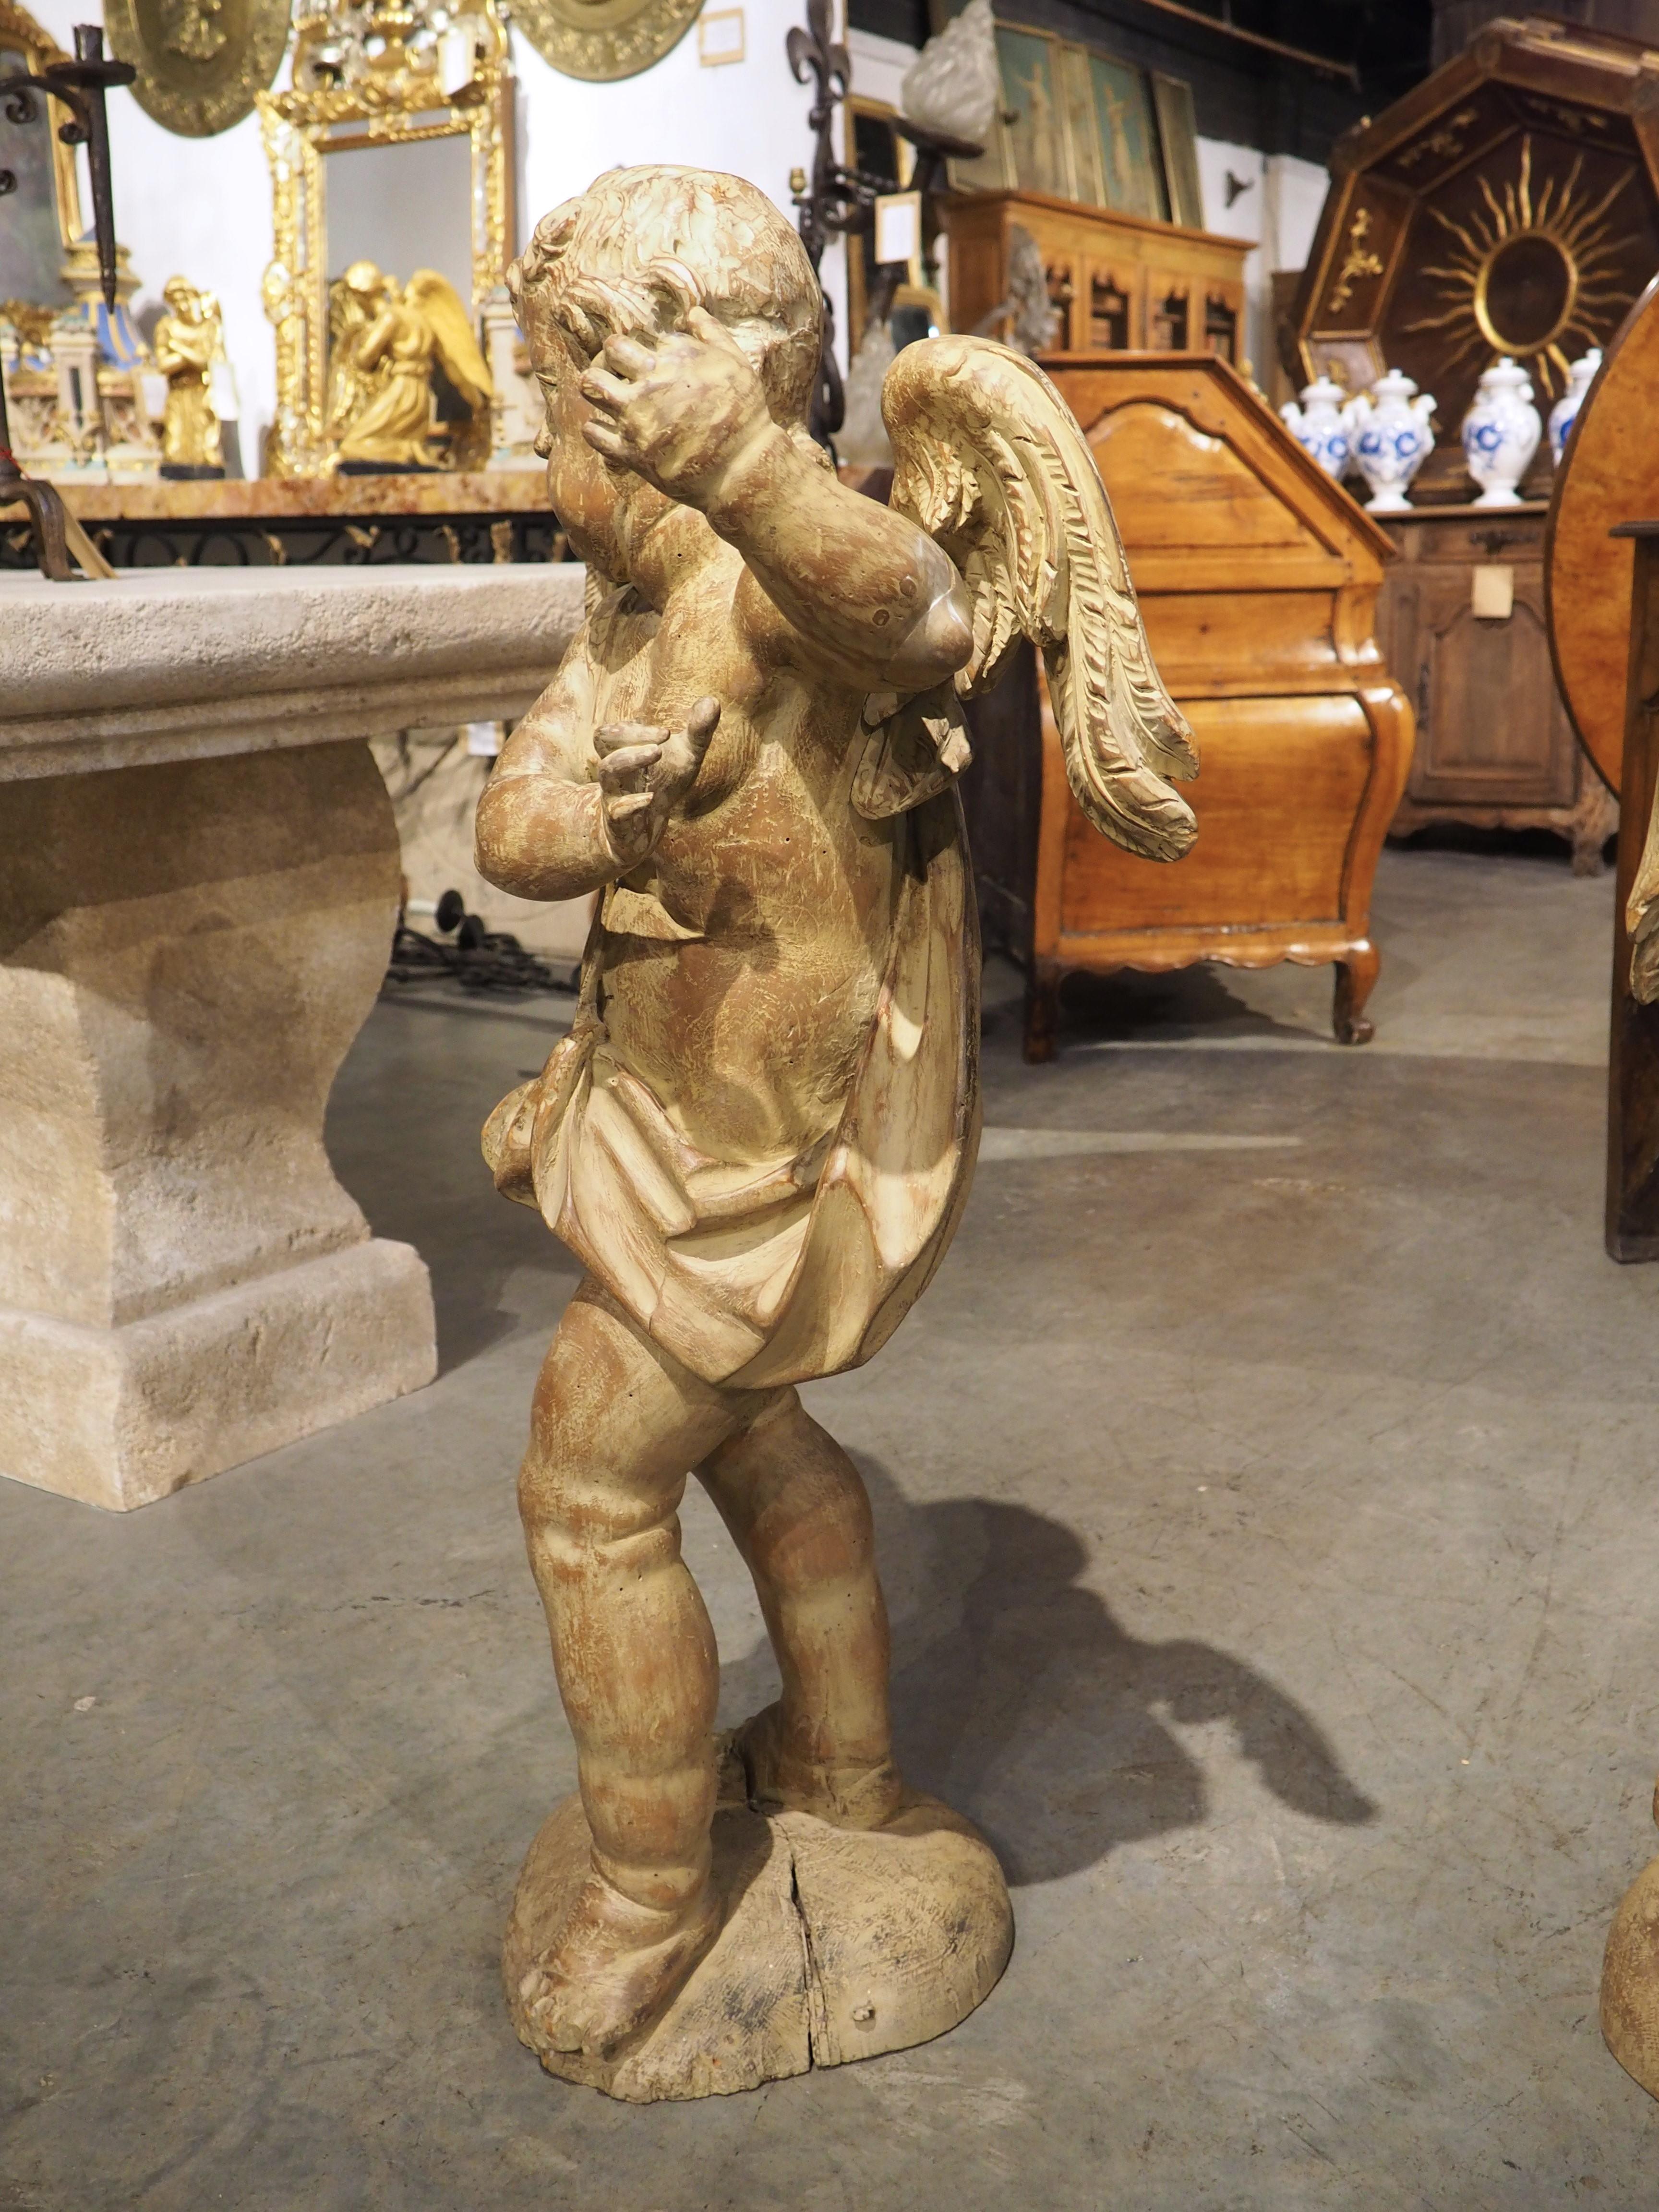 Originally from 18th-century Italy, this pair of winged cherubs were hand-carved from wood as reflections of each other, meaning that their bodies are orientated as mirror images. Both figures have been shown with their arms held high, positioned as